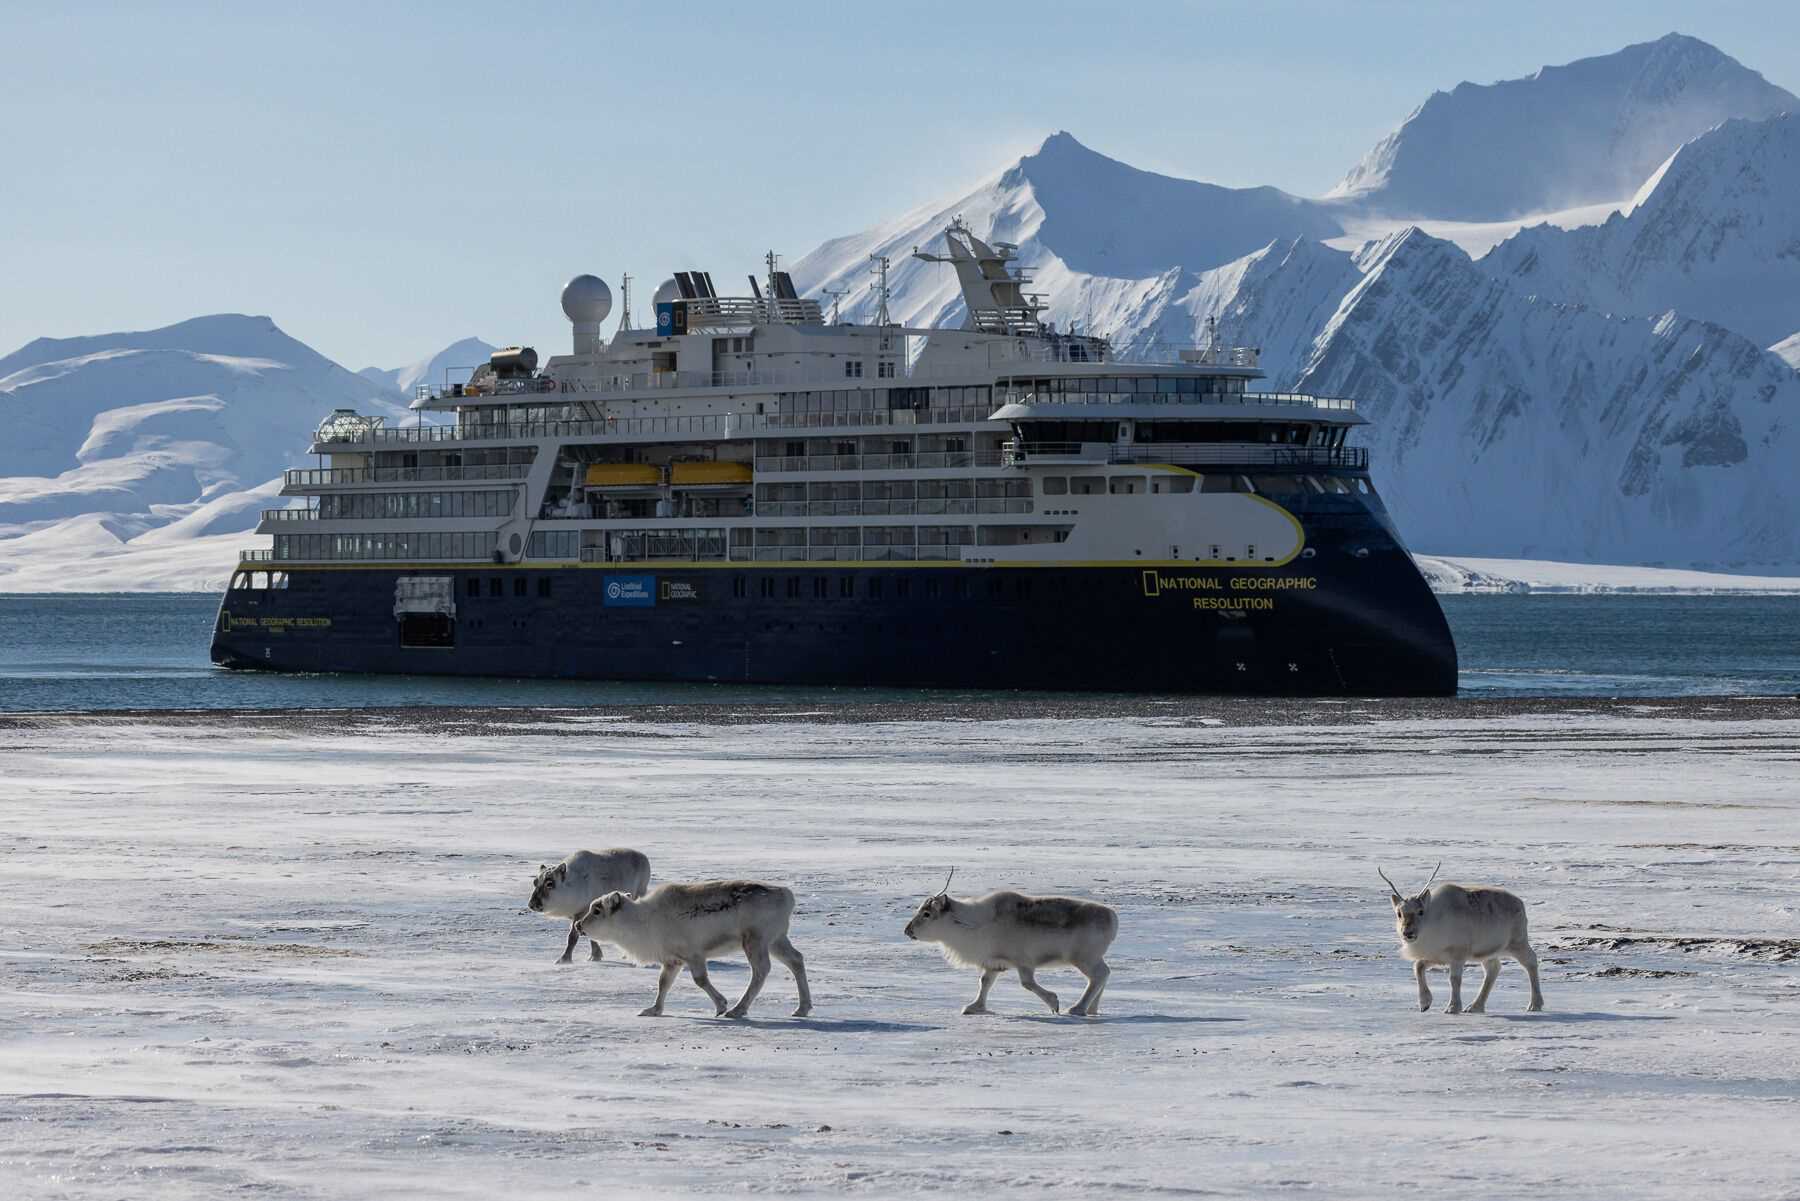 reindeer in front of the National Geographic Resolution